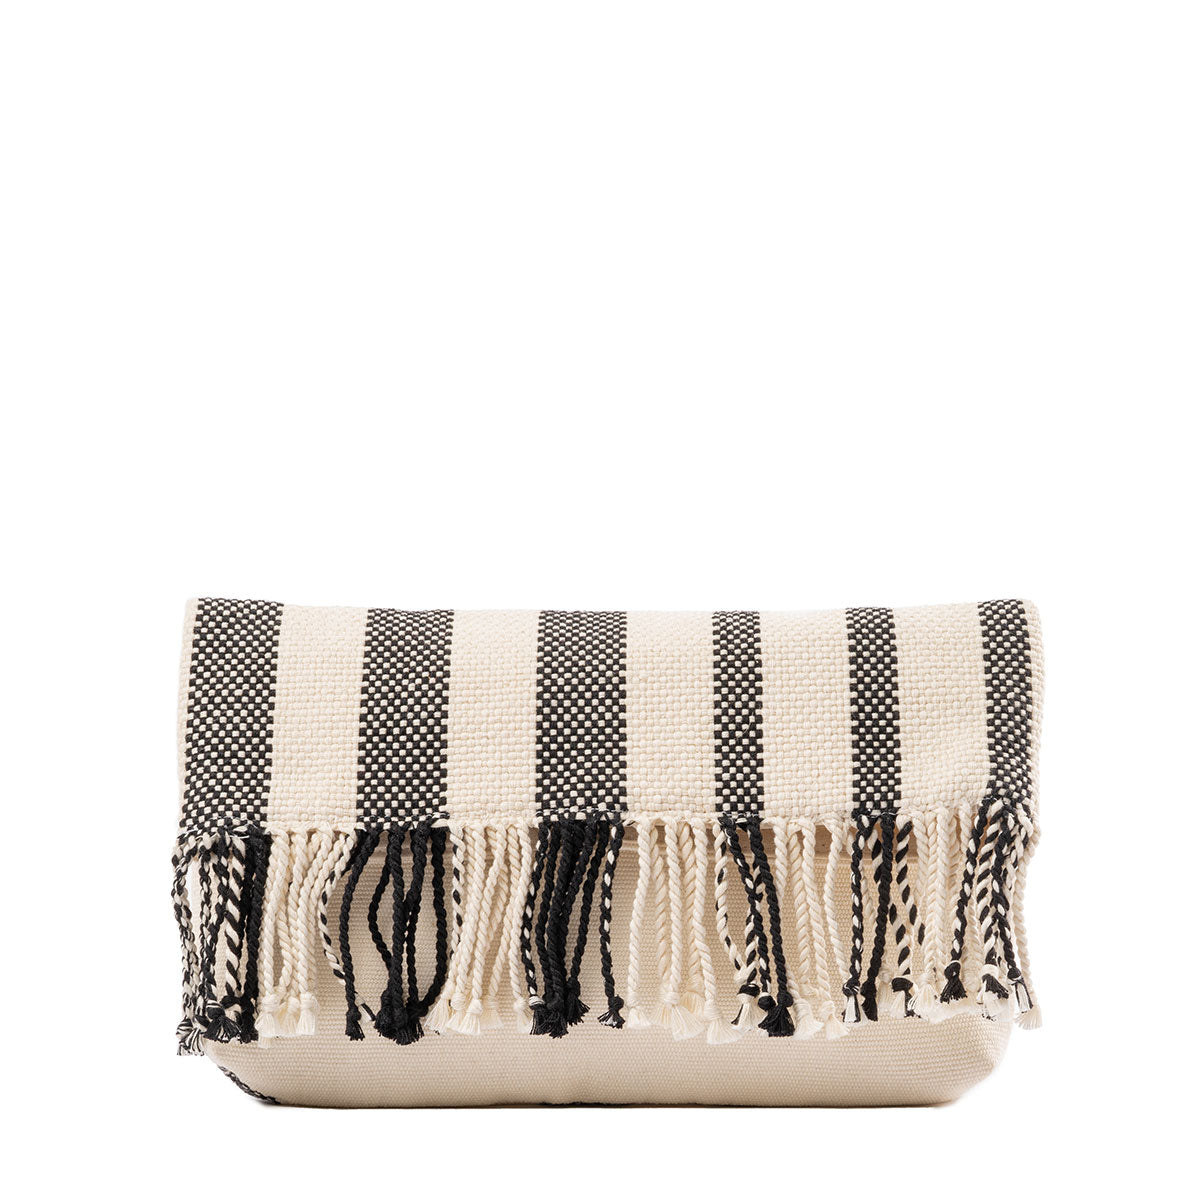 Margarita Clutch Tourmaline Basket Weave. The front is folded over with a black and white woven pattern and fringe.